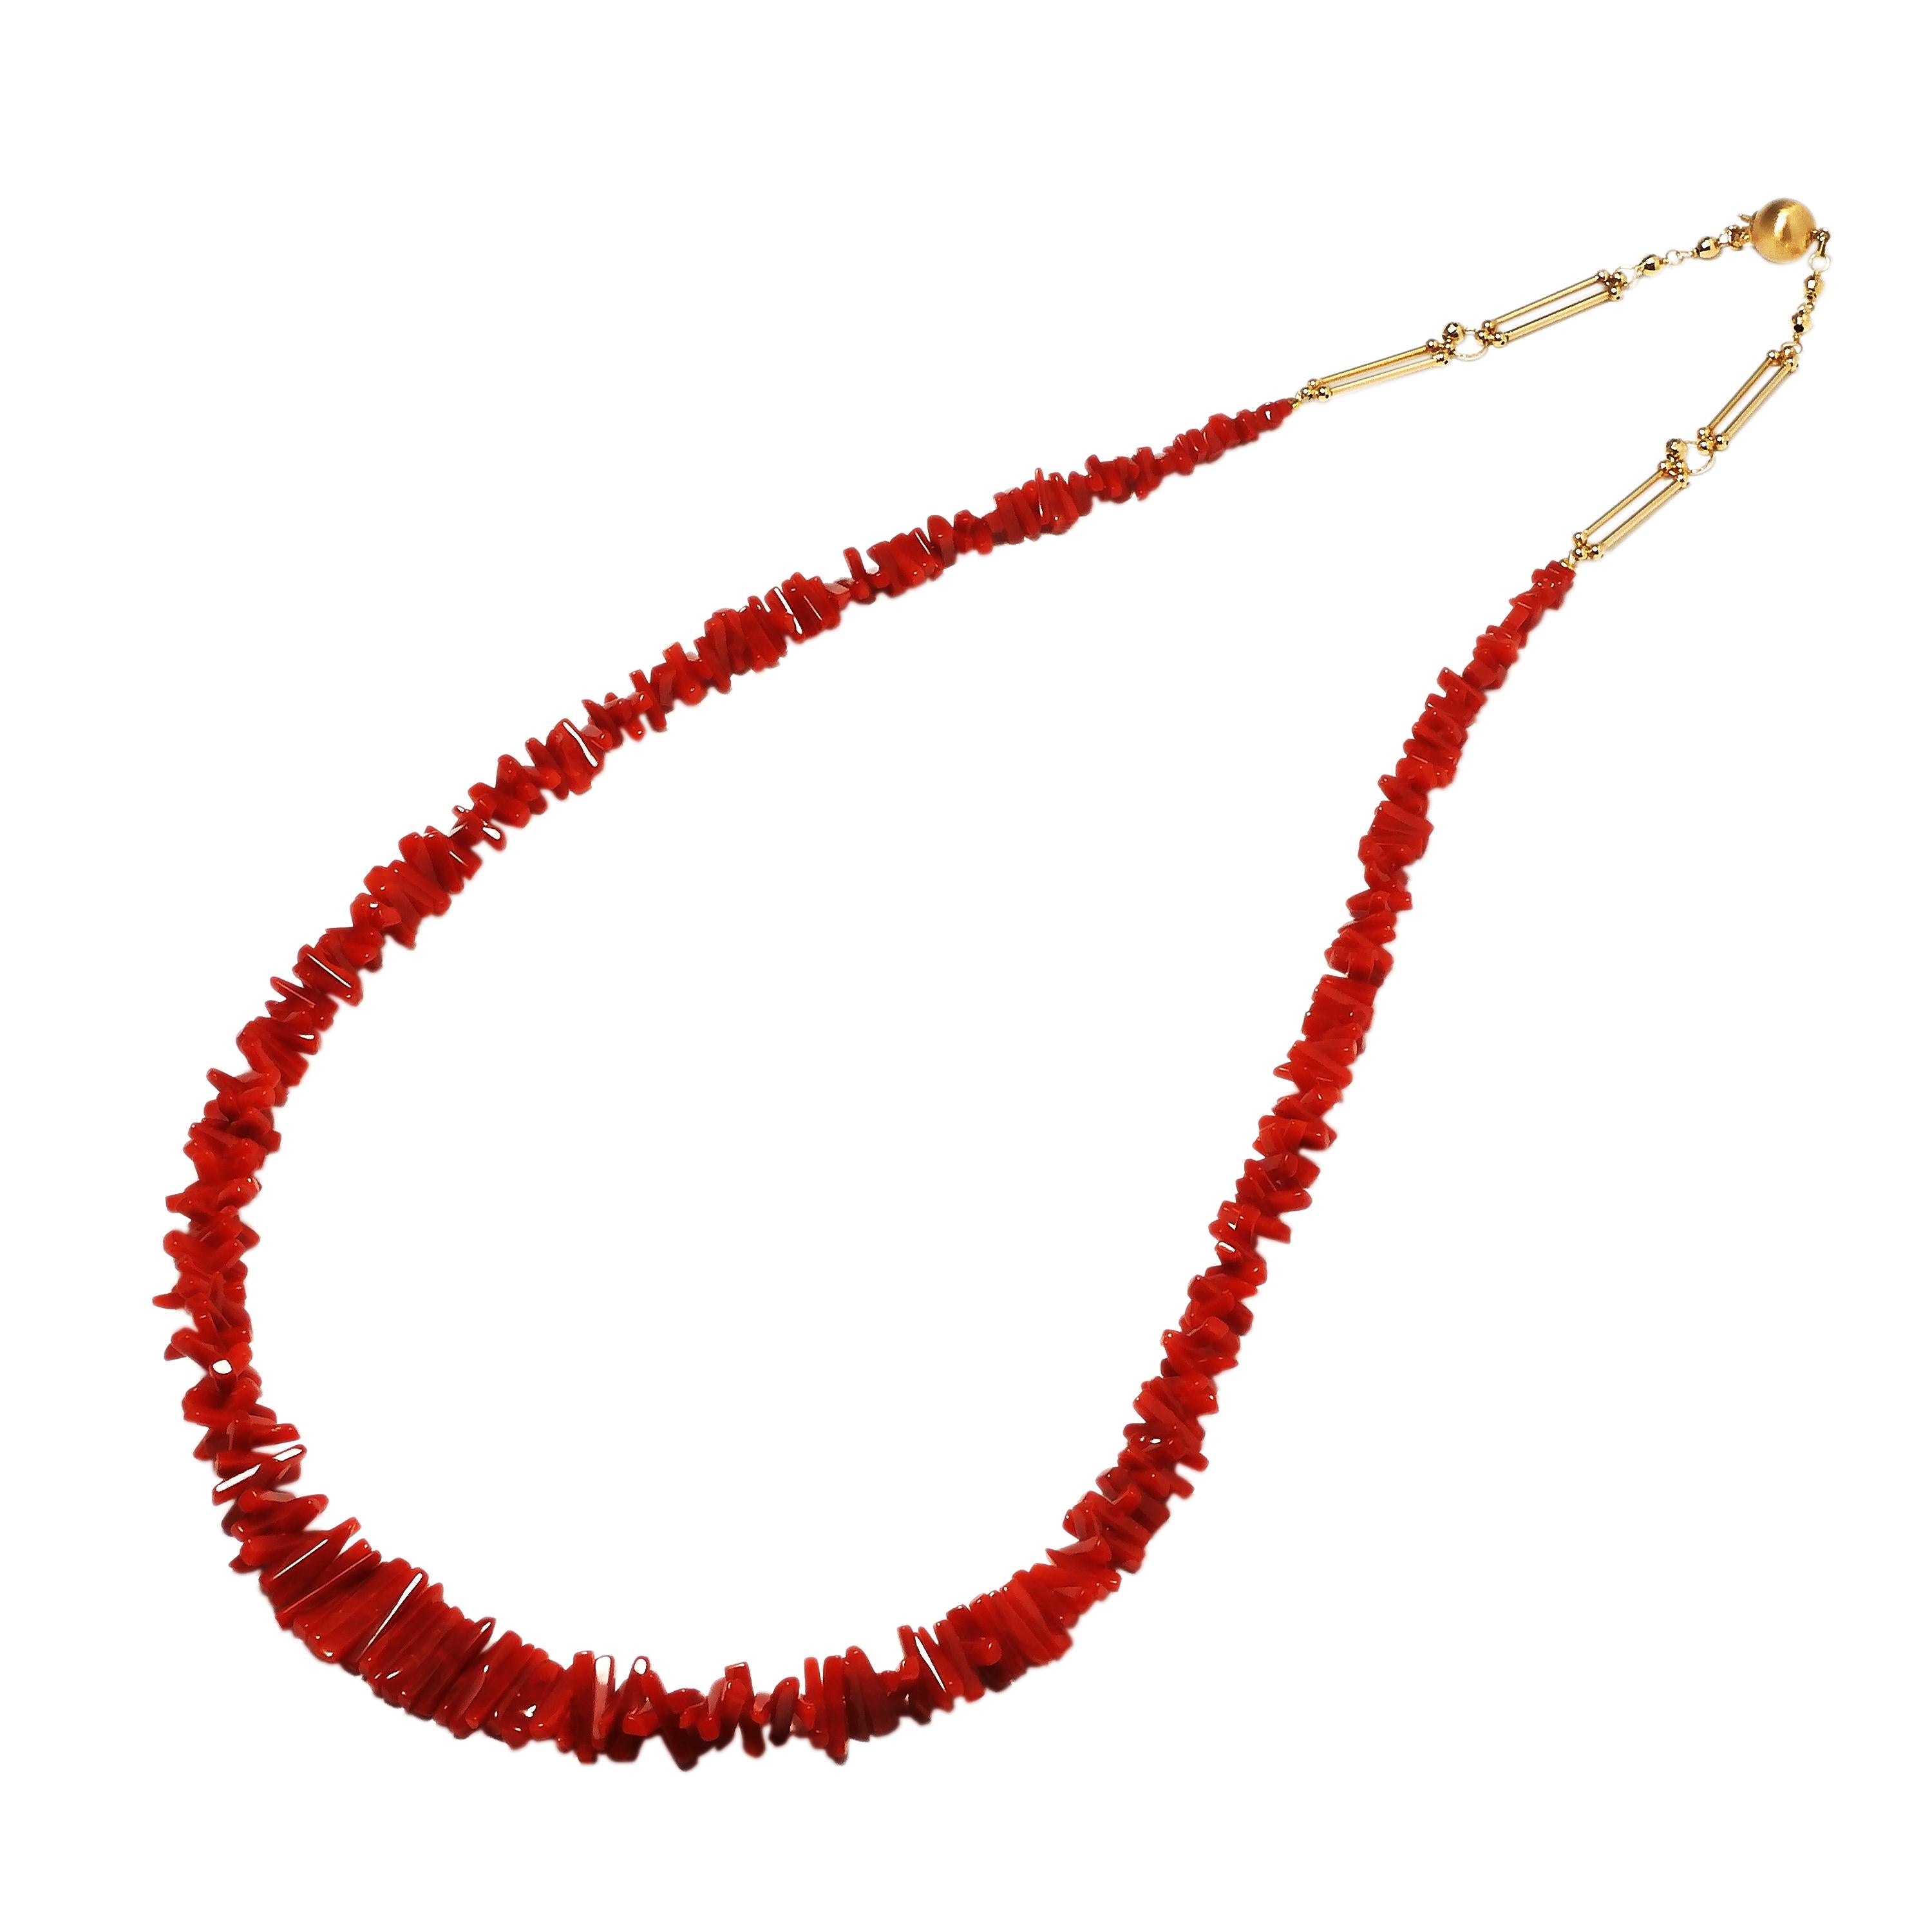 This necklace is designed by Yukiko Okura who is a fourth generation designer. 
Japanese Chiaka Sango (Oxblood Coral) has a white core, and if you use the tip of a branch, a white spot will inevitably appear.
For this necklace, the white spot has